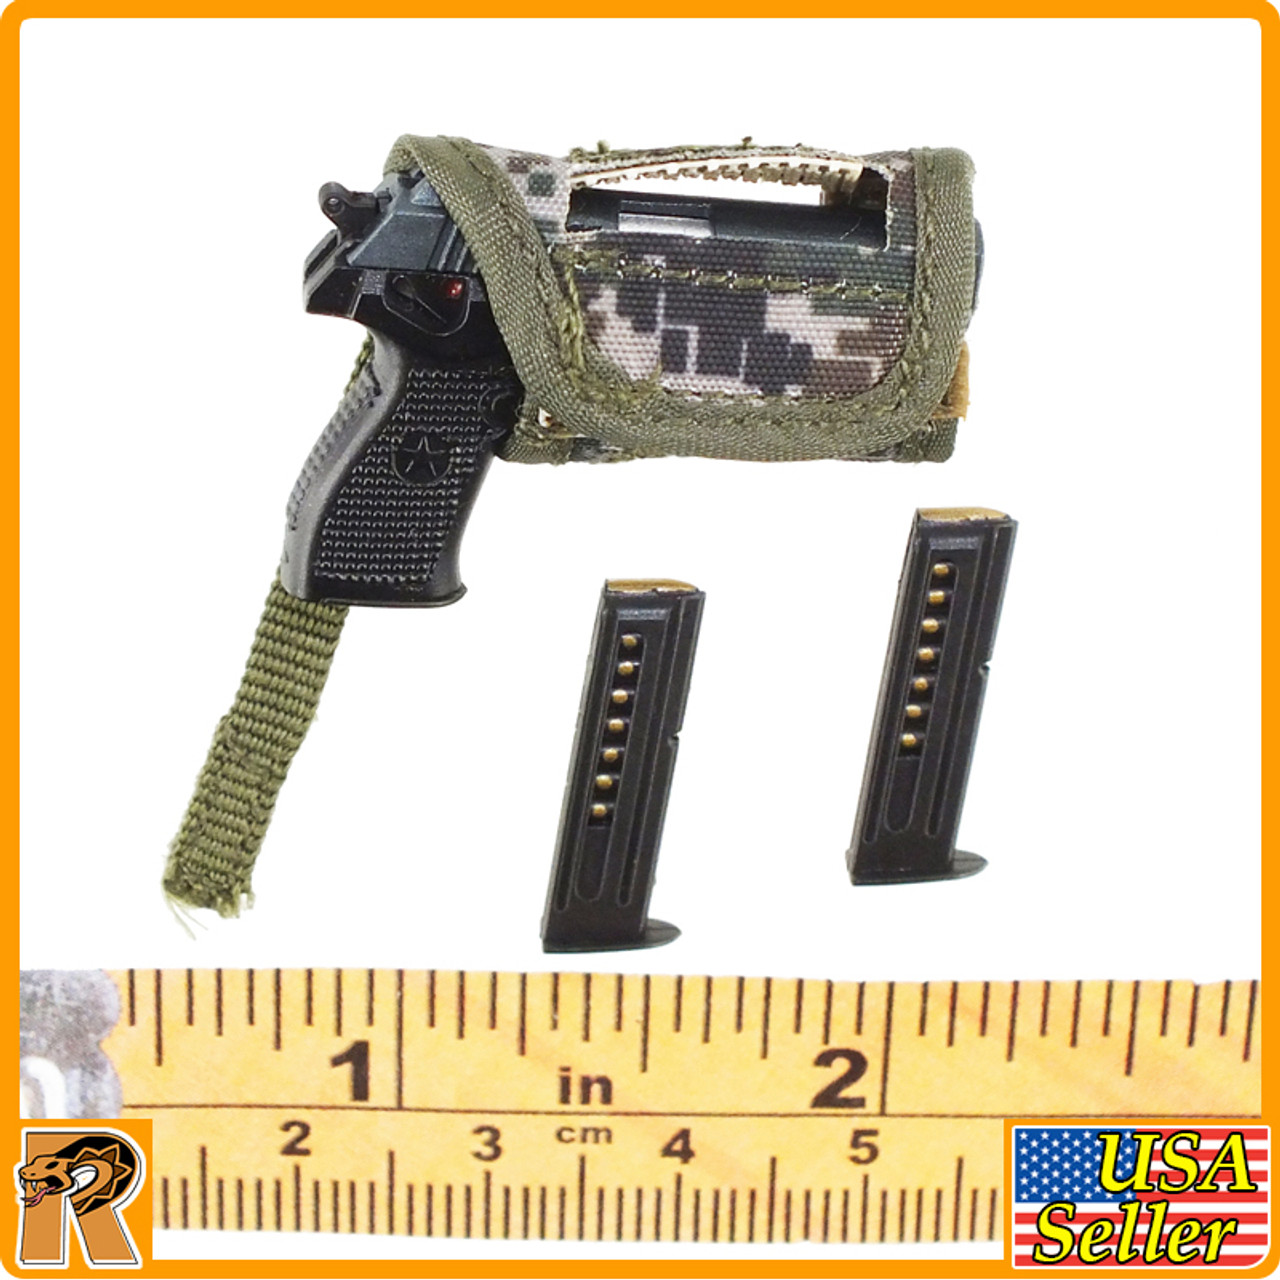 UN Chinese Peacekeepers - QSZ92 Pistol & Chest Holster - 1/6 Scale -